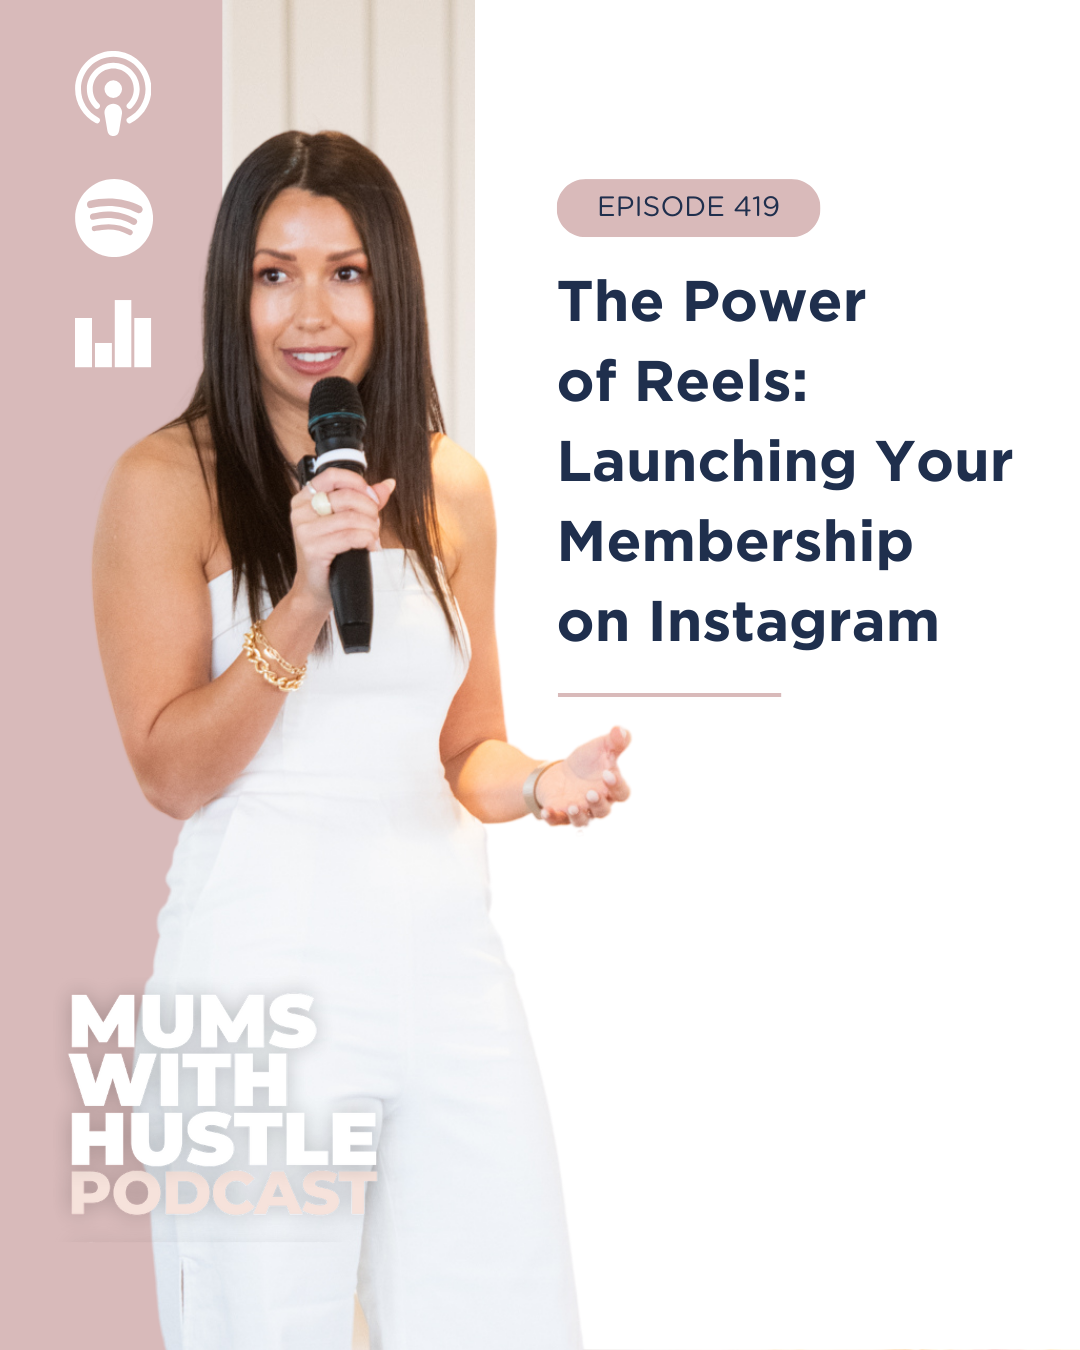 g-your-membership-on-instagram.mp3" ] In this episode, I’m going to walk you through launching your membership on Instagram with the power of reels!